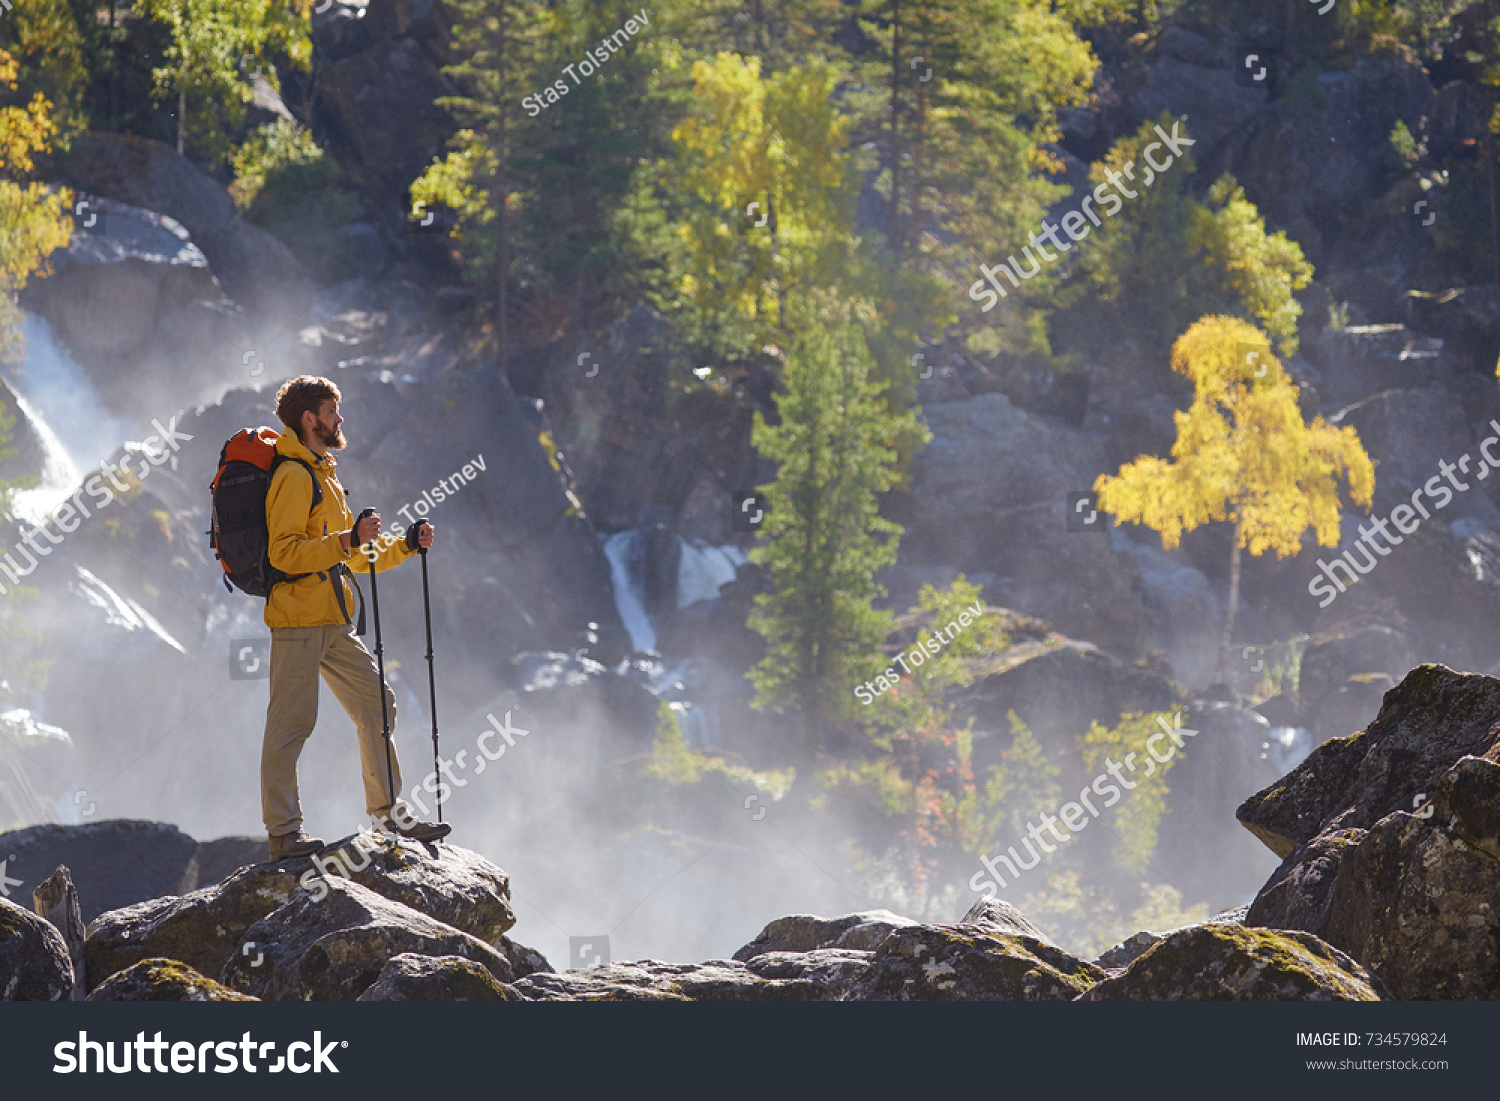 Hiker hiking with backpack looking at waterfall in park in beautiful autumn nature landscape. Portrait of male adult back standing outdoor. #734579824